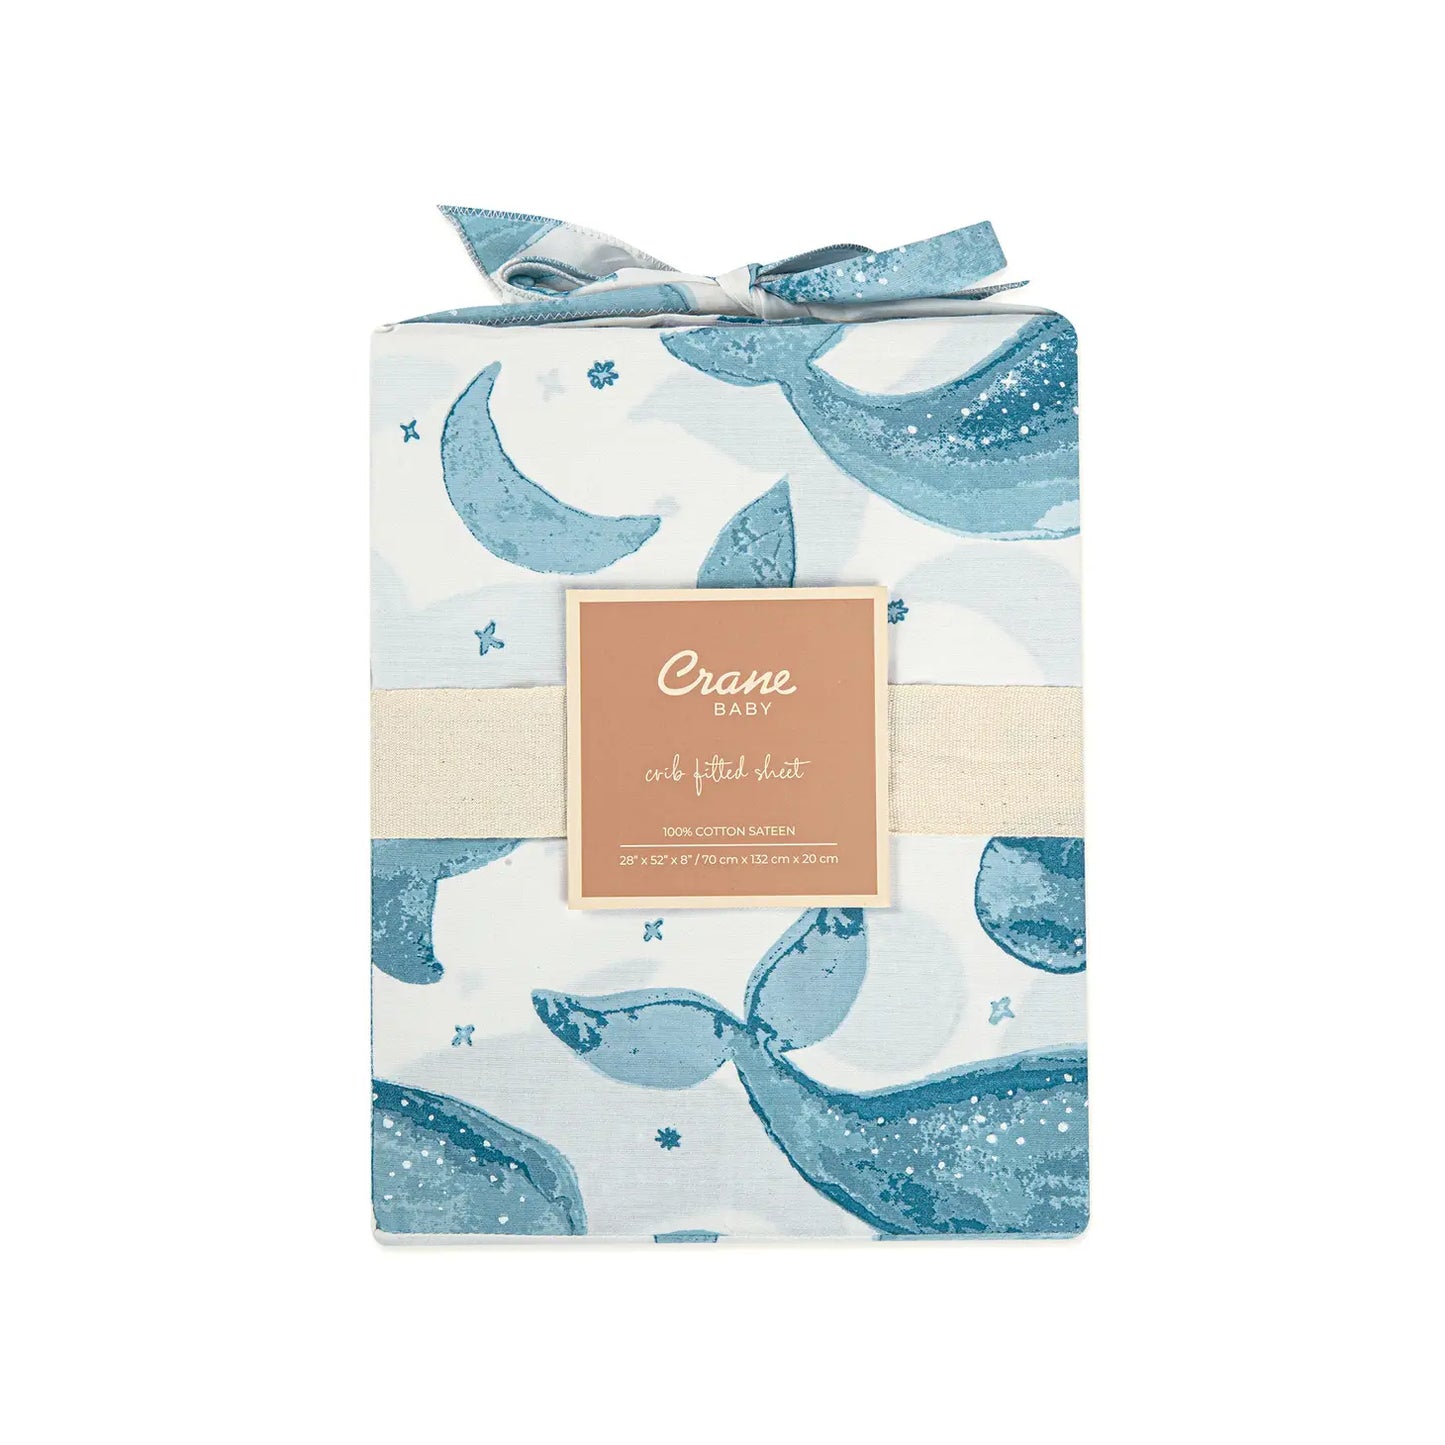 Caspian Crib Sheet (Whale) + Quilted Change Pad Cover